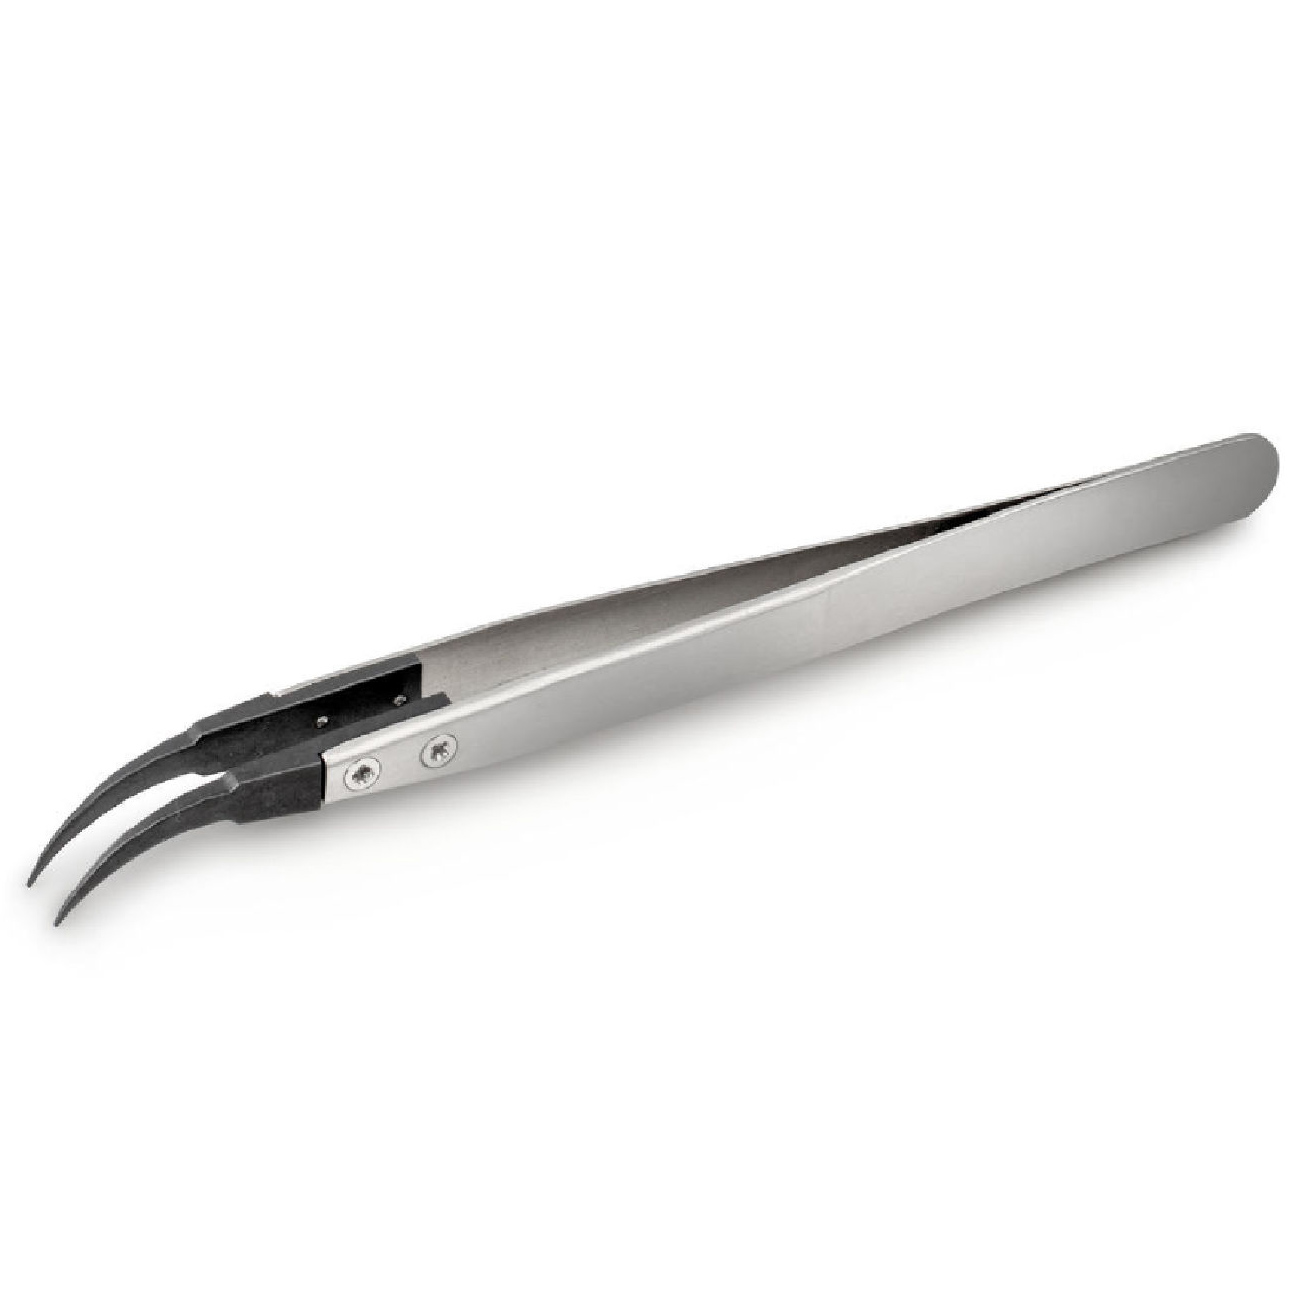 K 315-246 Tweezers 130mm, stainless steel, curved, high-quality carbon tips - Kern 315-246